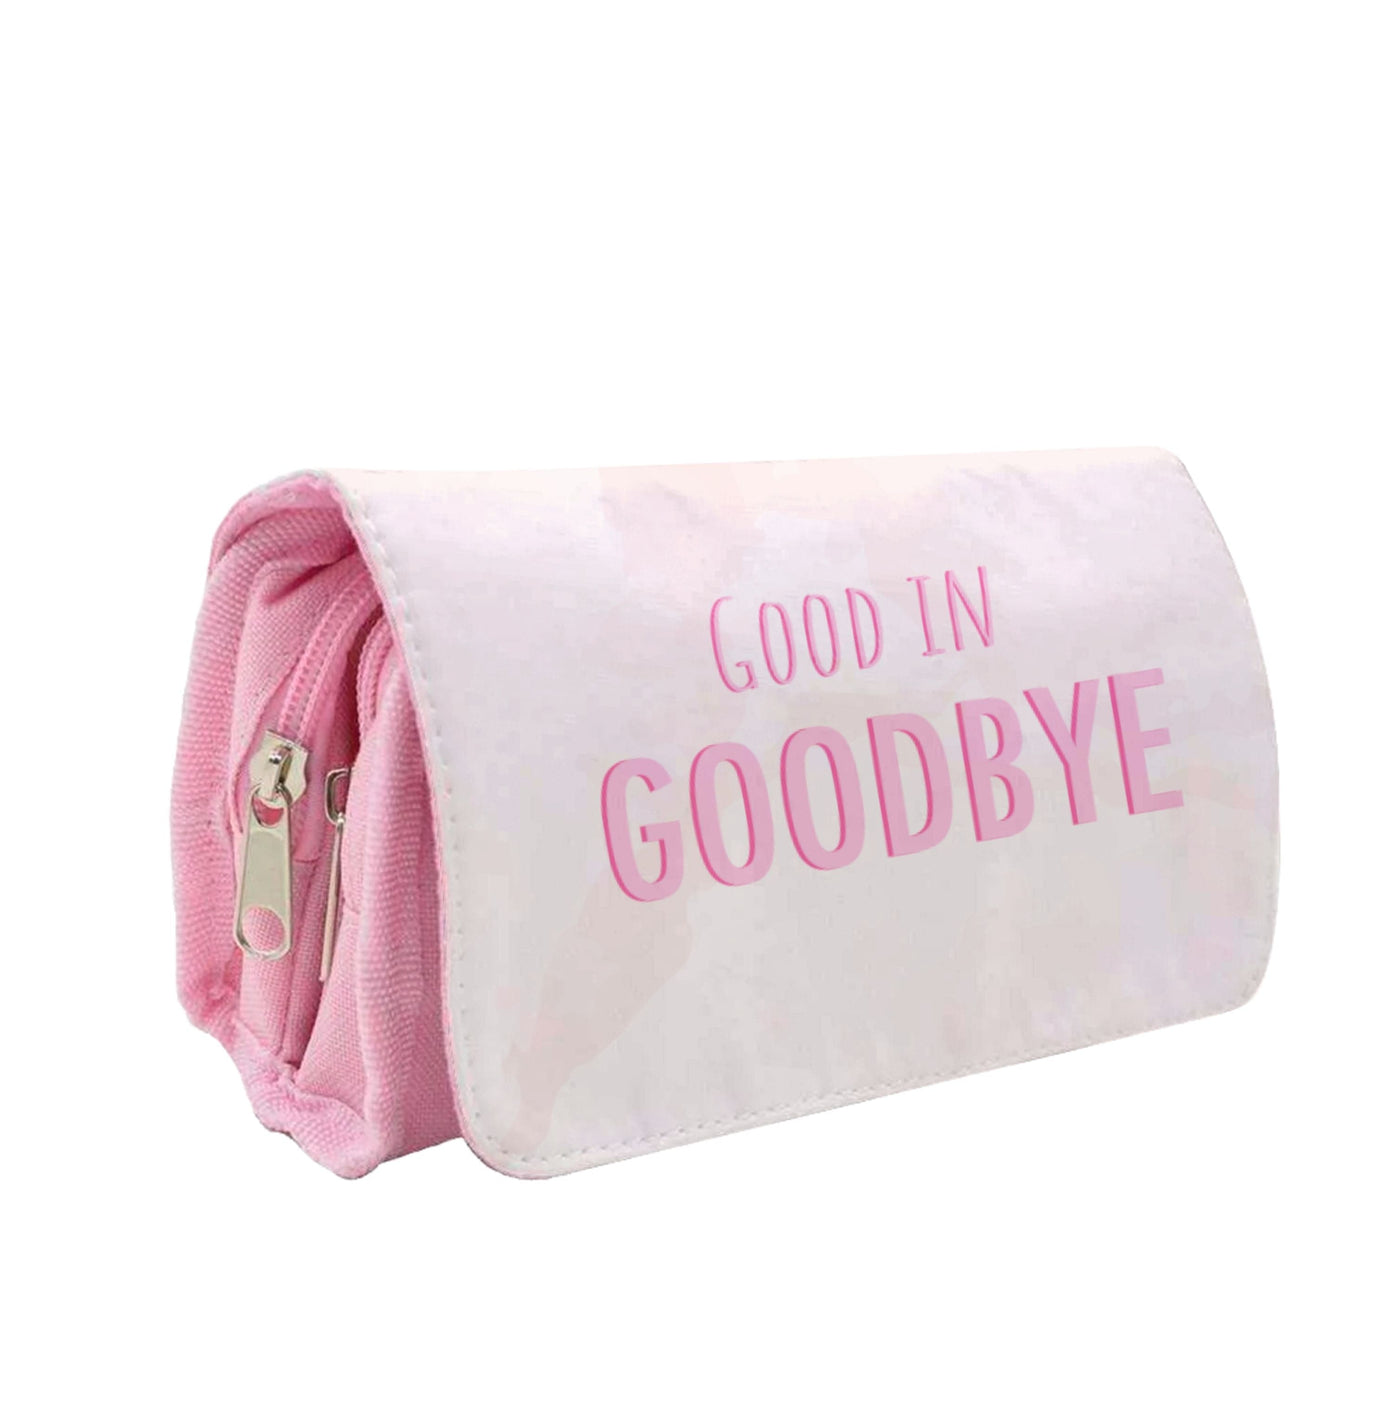 Good In Goodbye - Maddison Beer Pencil Case